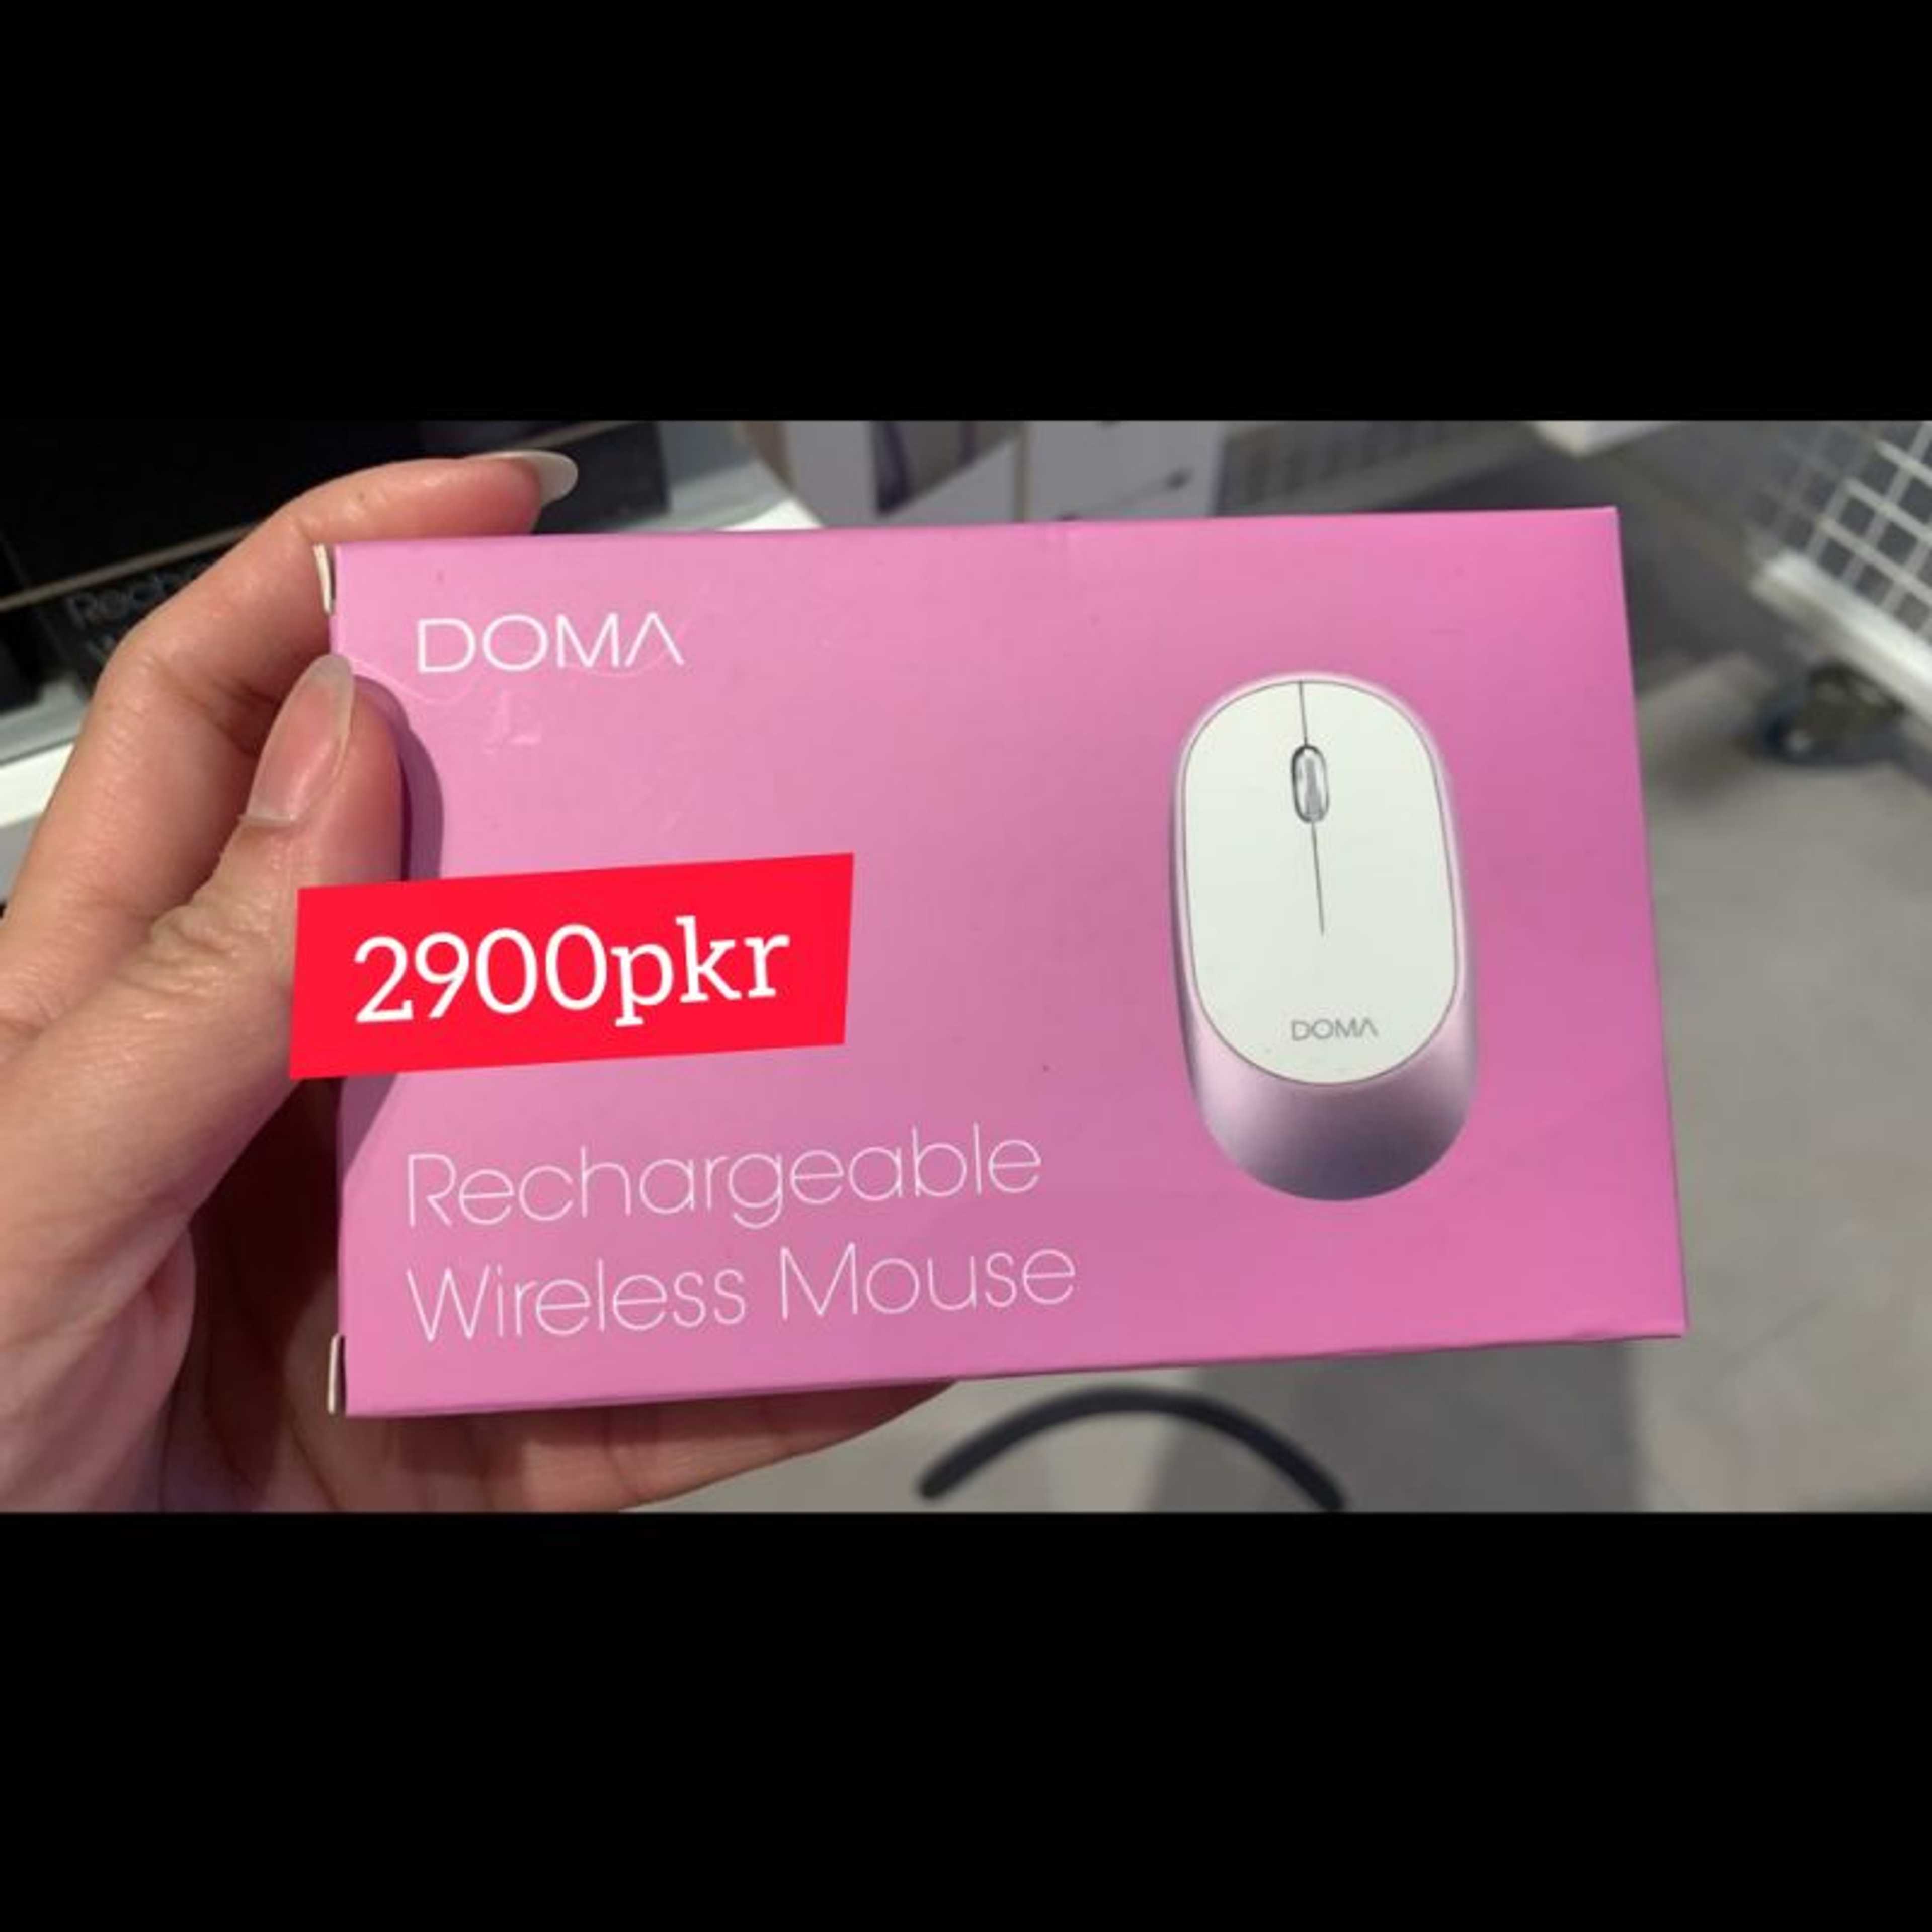 Rechargeable and wireless mouse